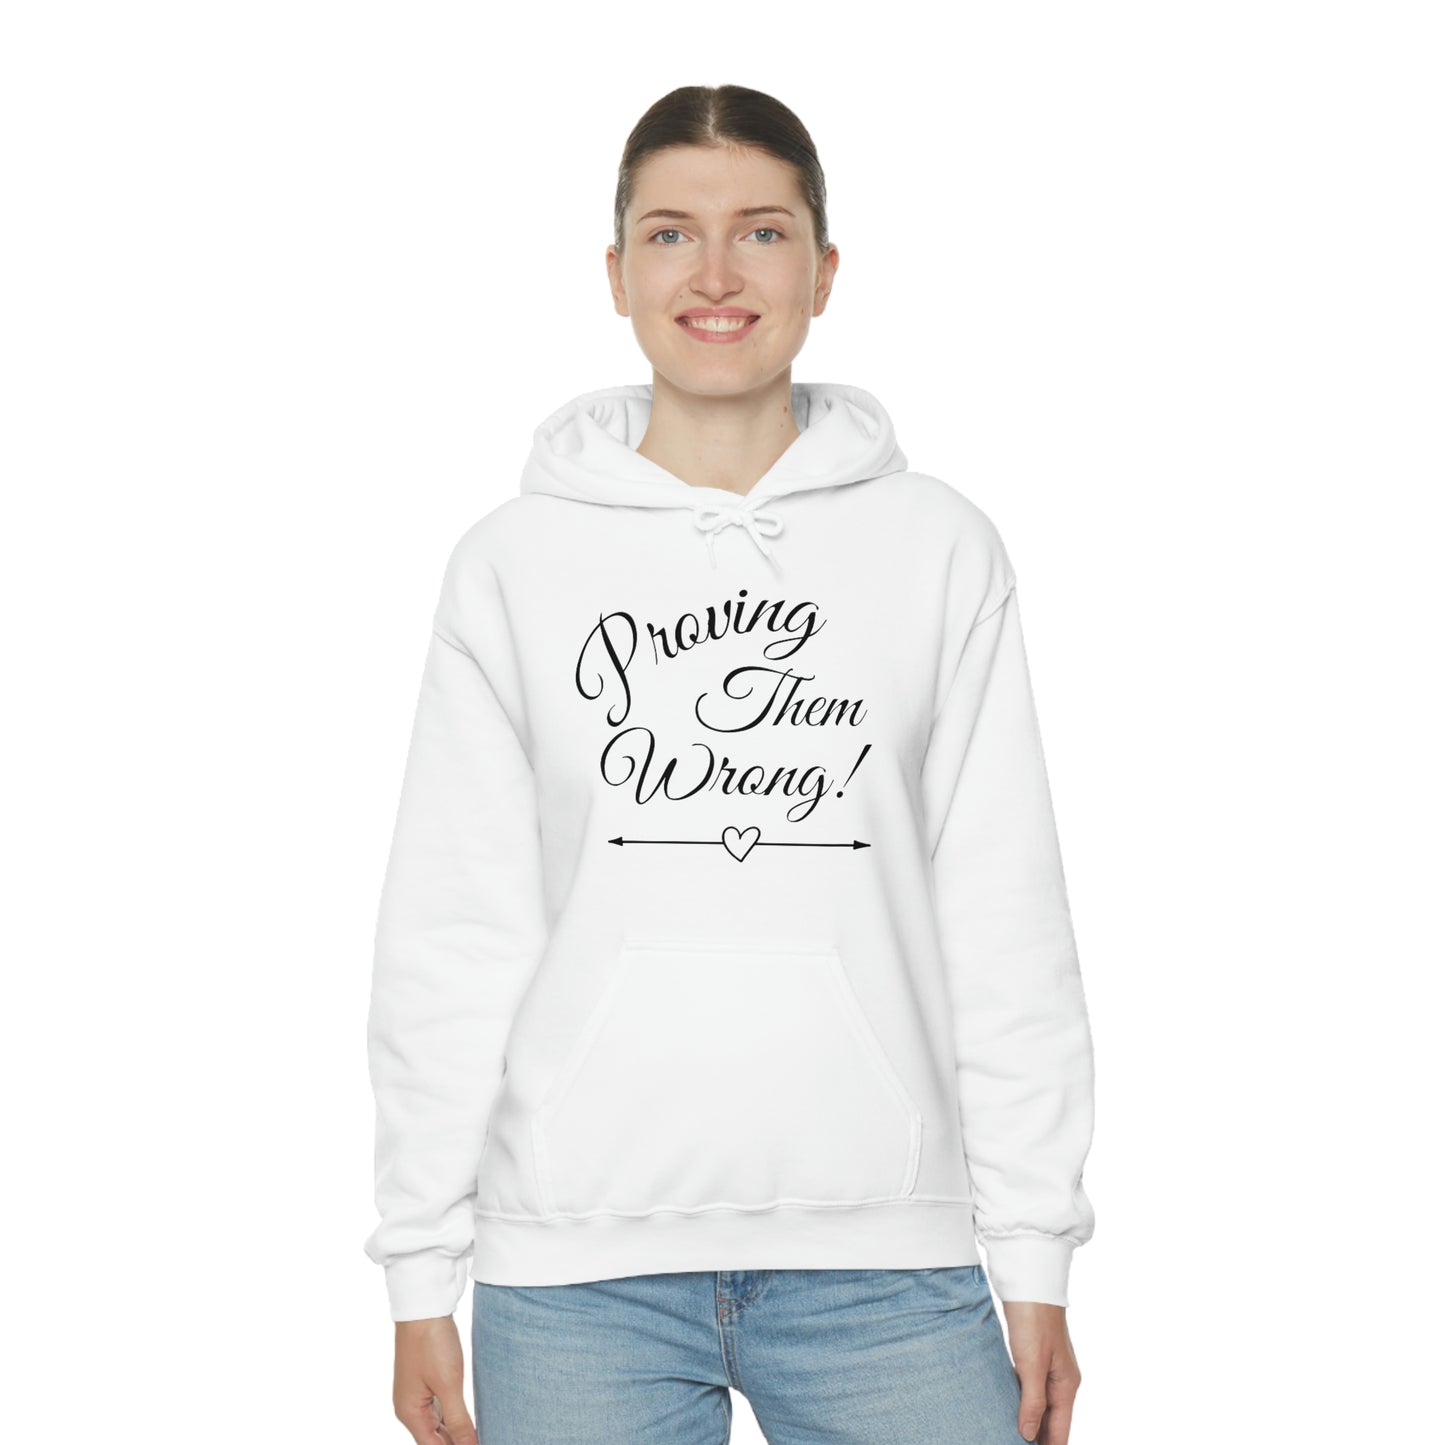 ‘Proving Them Wrong’ Printed Front & Back   Unisex Heavy Blend™ Hooded Sweatshirt